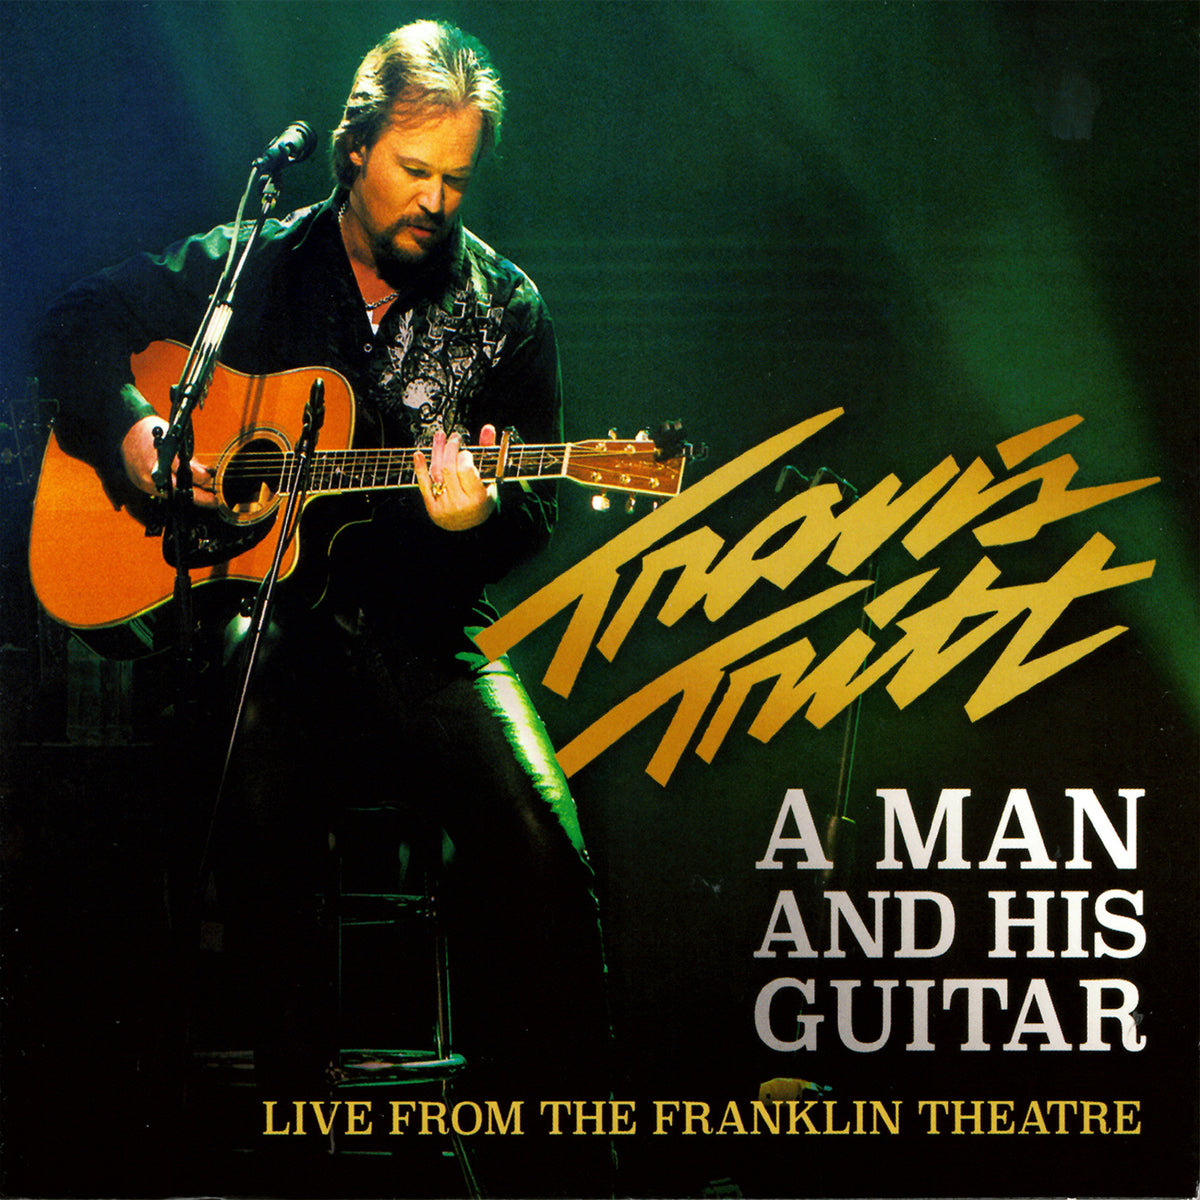 Travis Tritt - A Man and His Guitar (Live from The Franklin Theatre) - POR43374